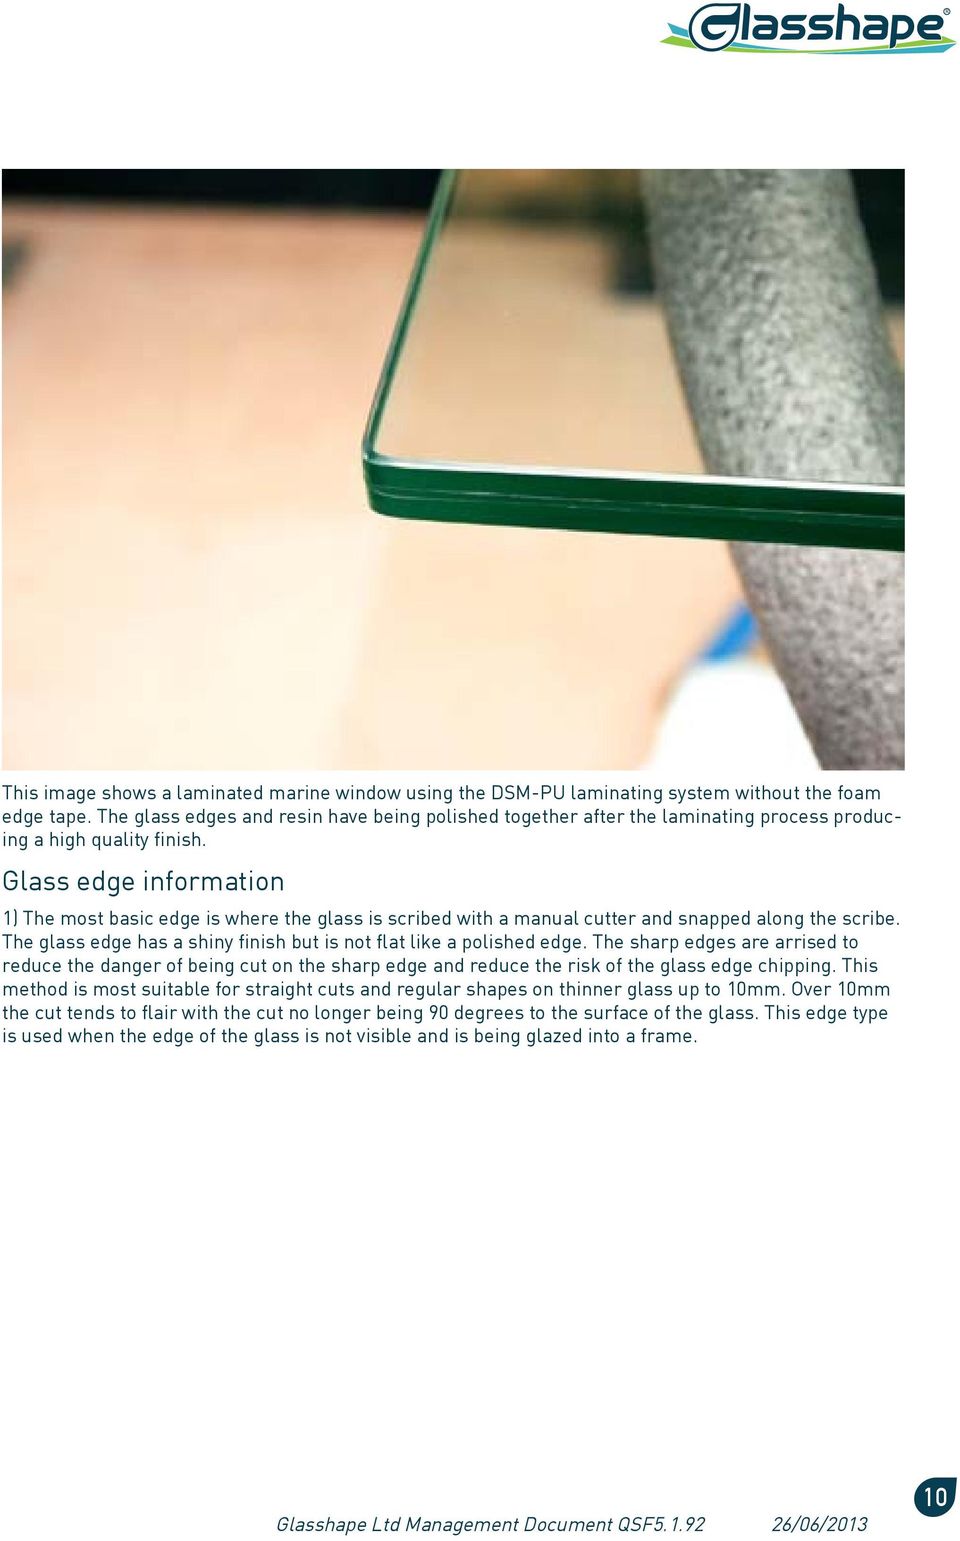 Glass edge information 1) The most basic edge is where the glass is scribed with a manual cutter and snapped along the scribe. The glass edge has a shiny finish but is not flat like a polished edge.